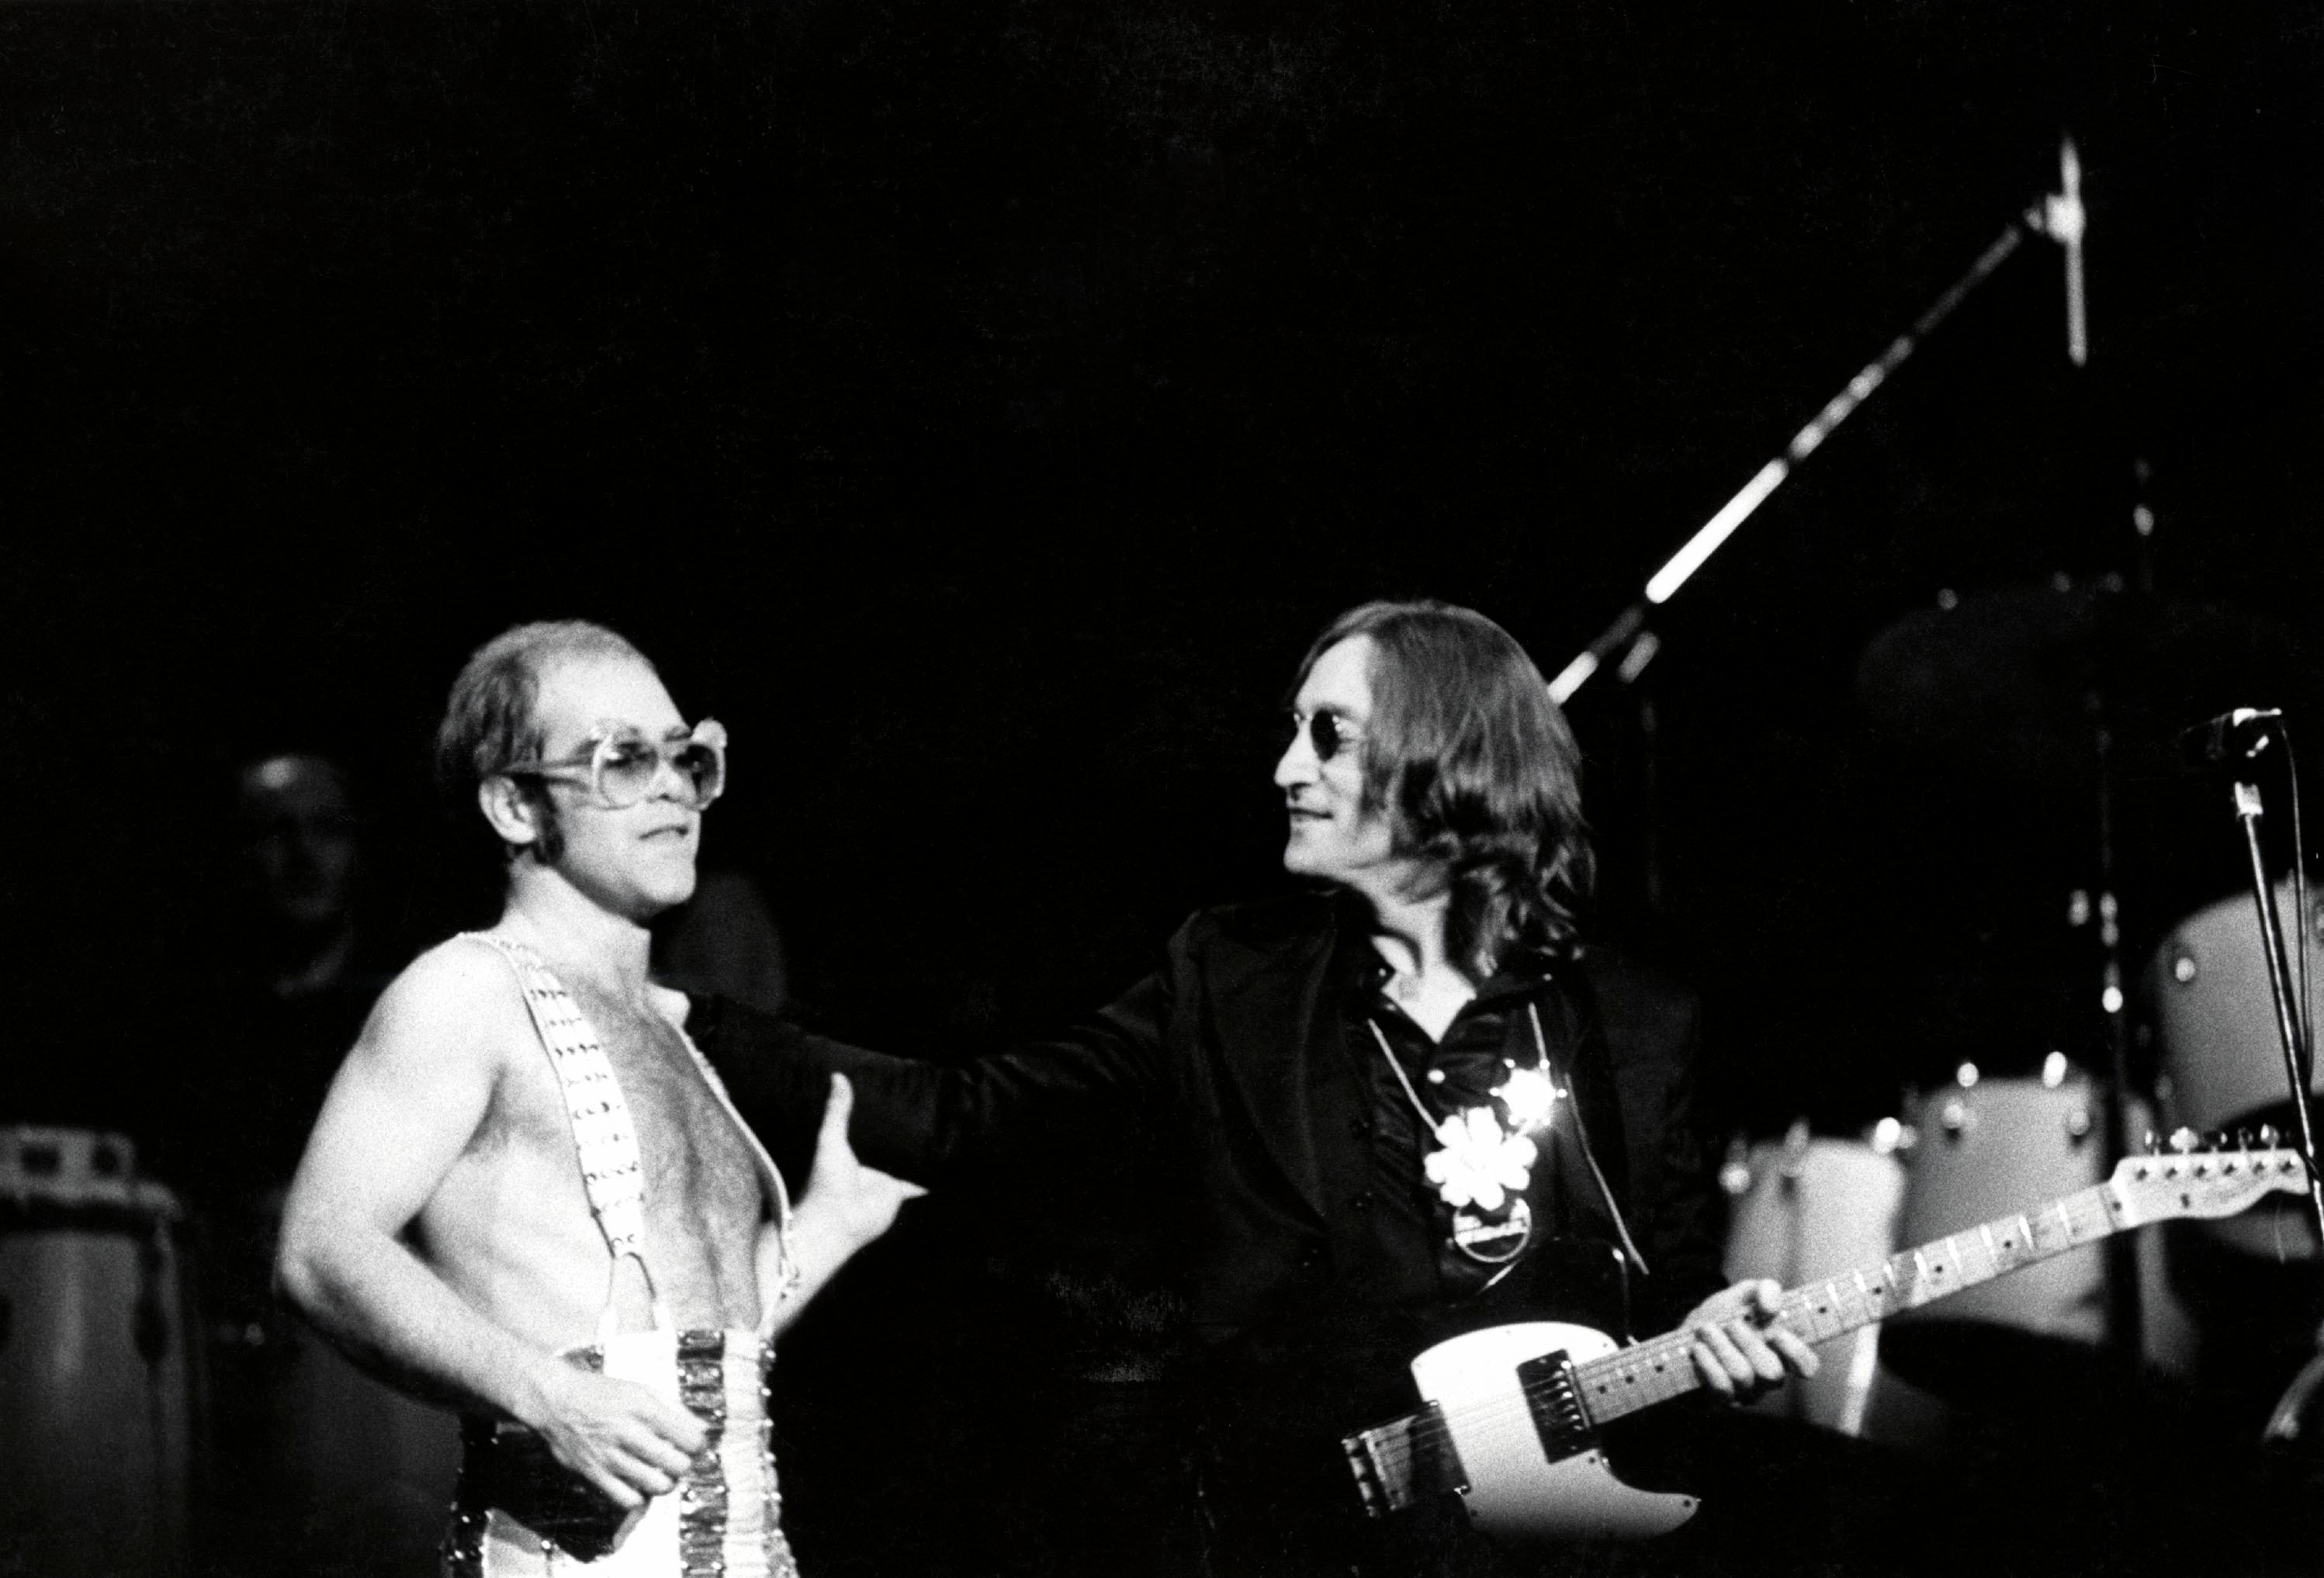 Elton John and John Lennon appear on stage together at Madison Square Garden